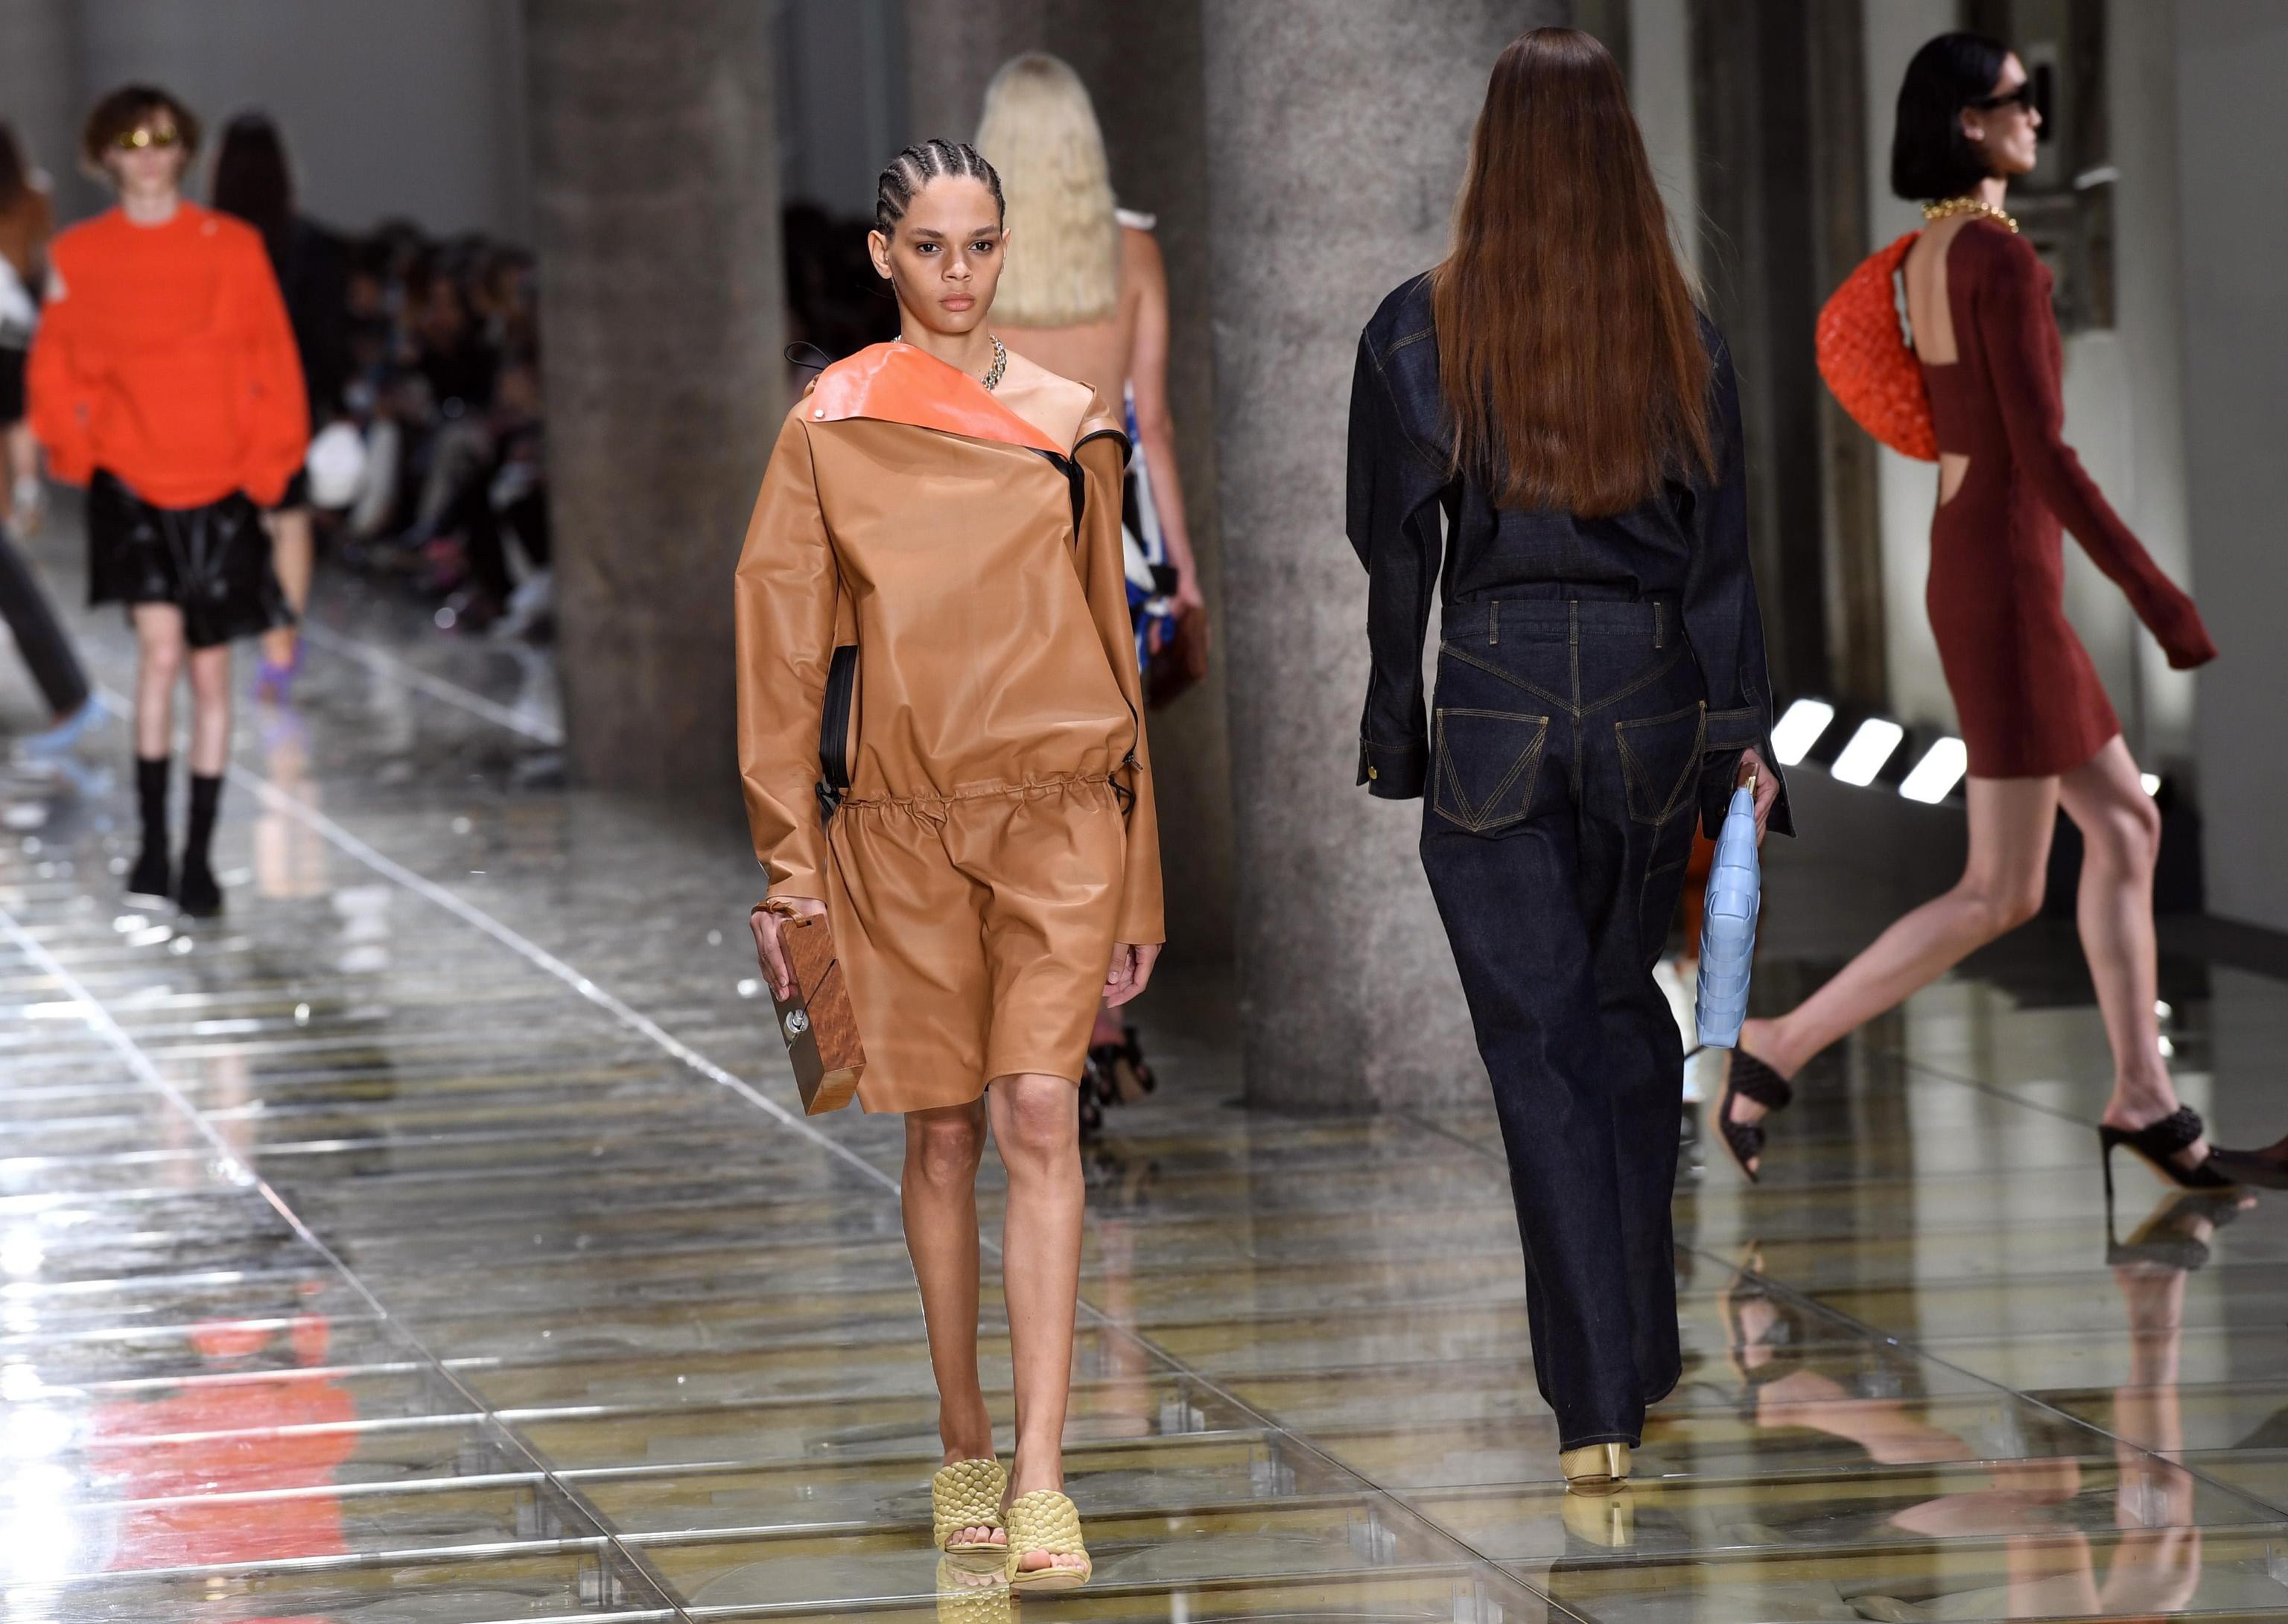 Milan Fashion Week: How far has Daniel Lee bent the rules for his